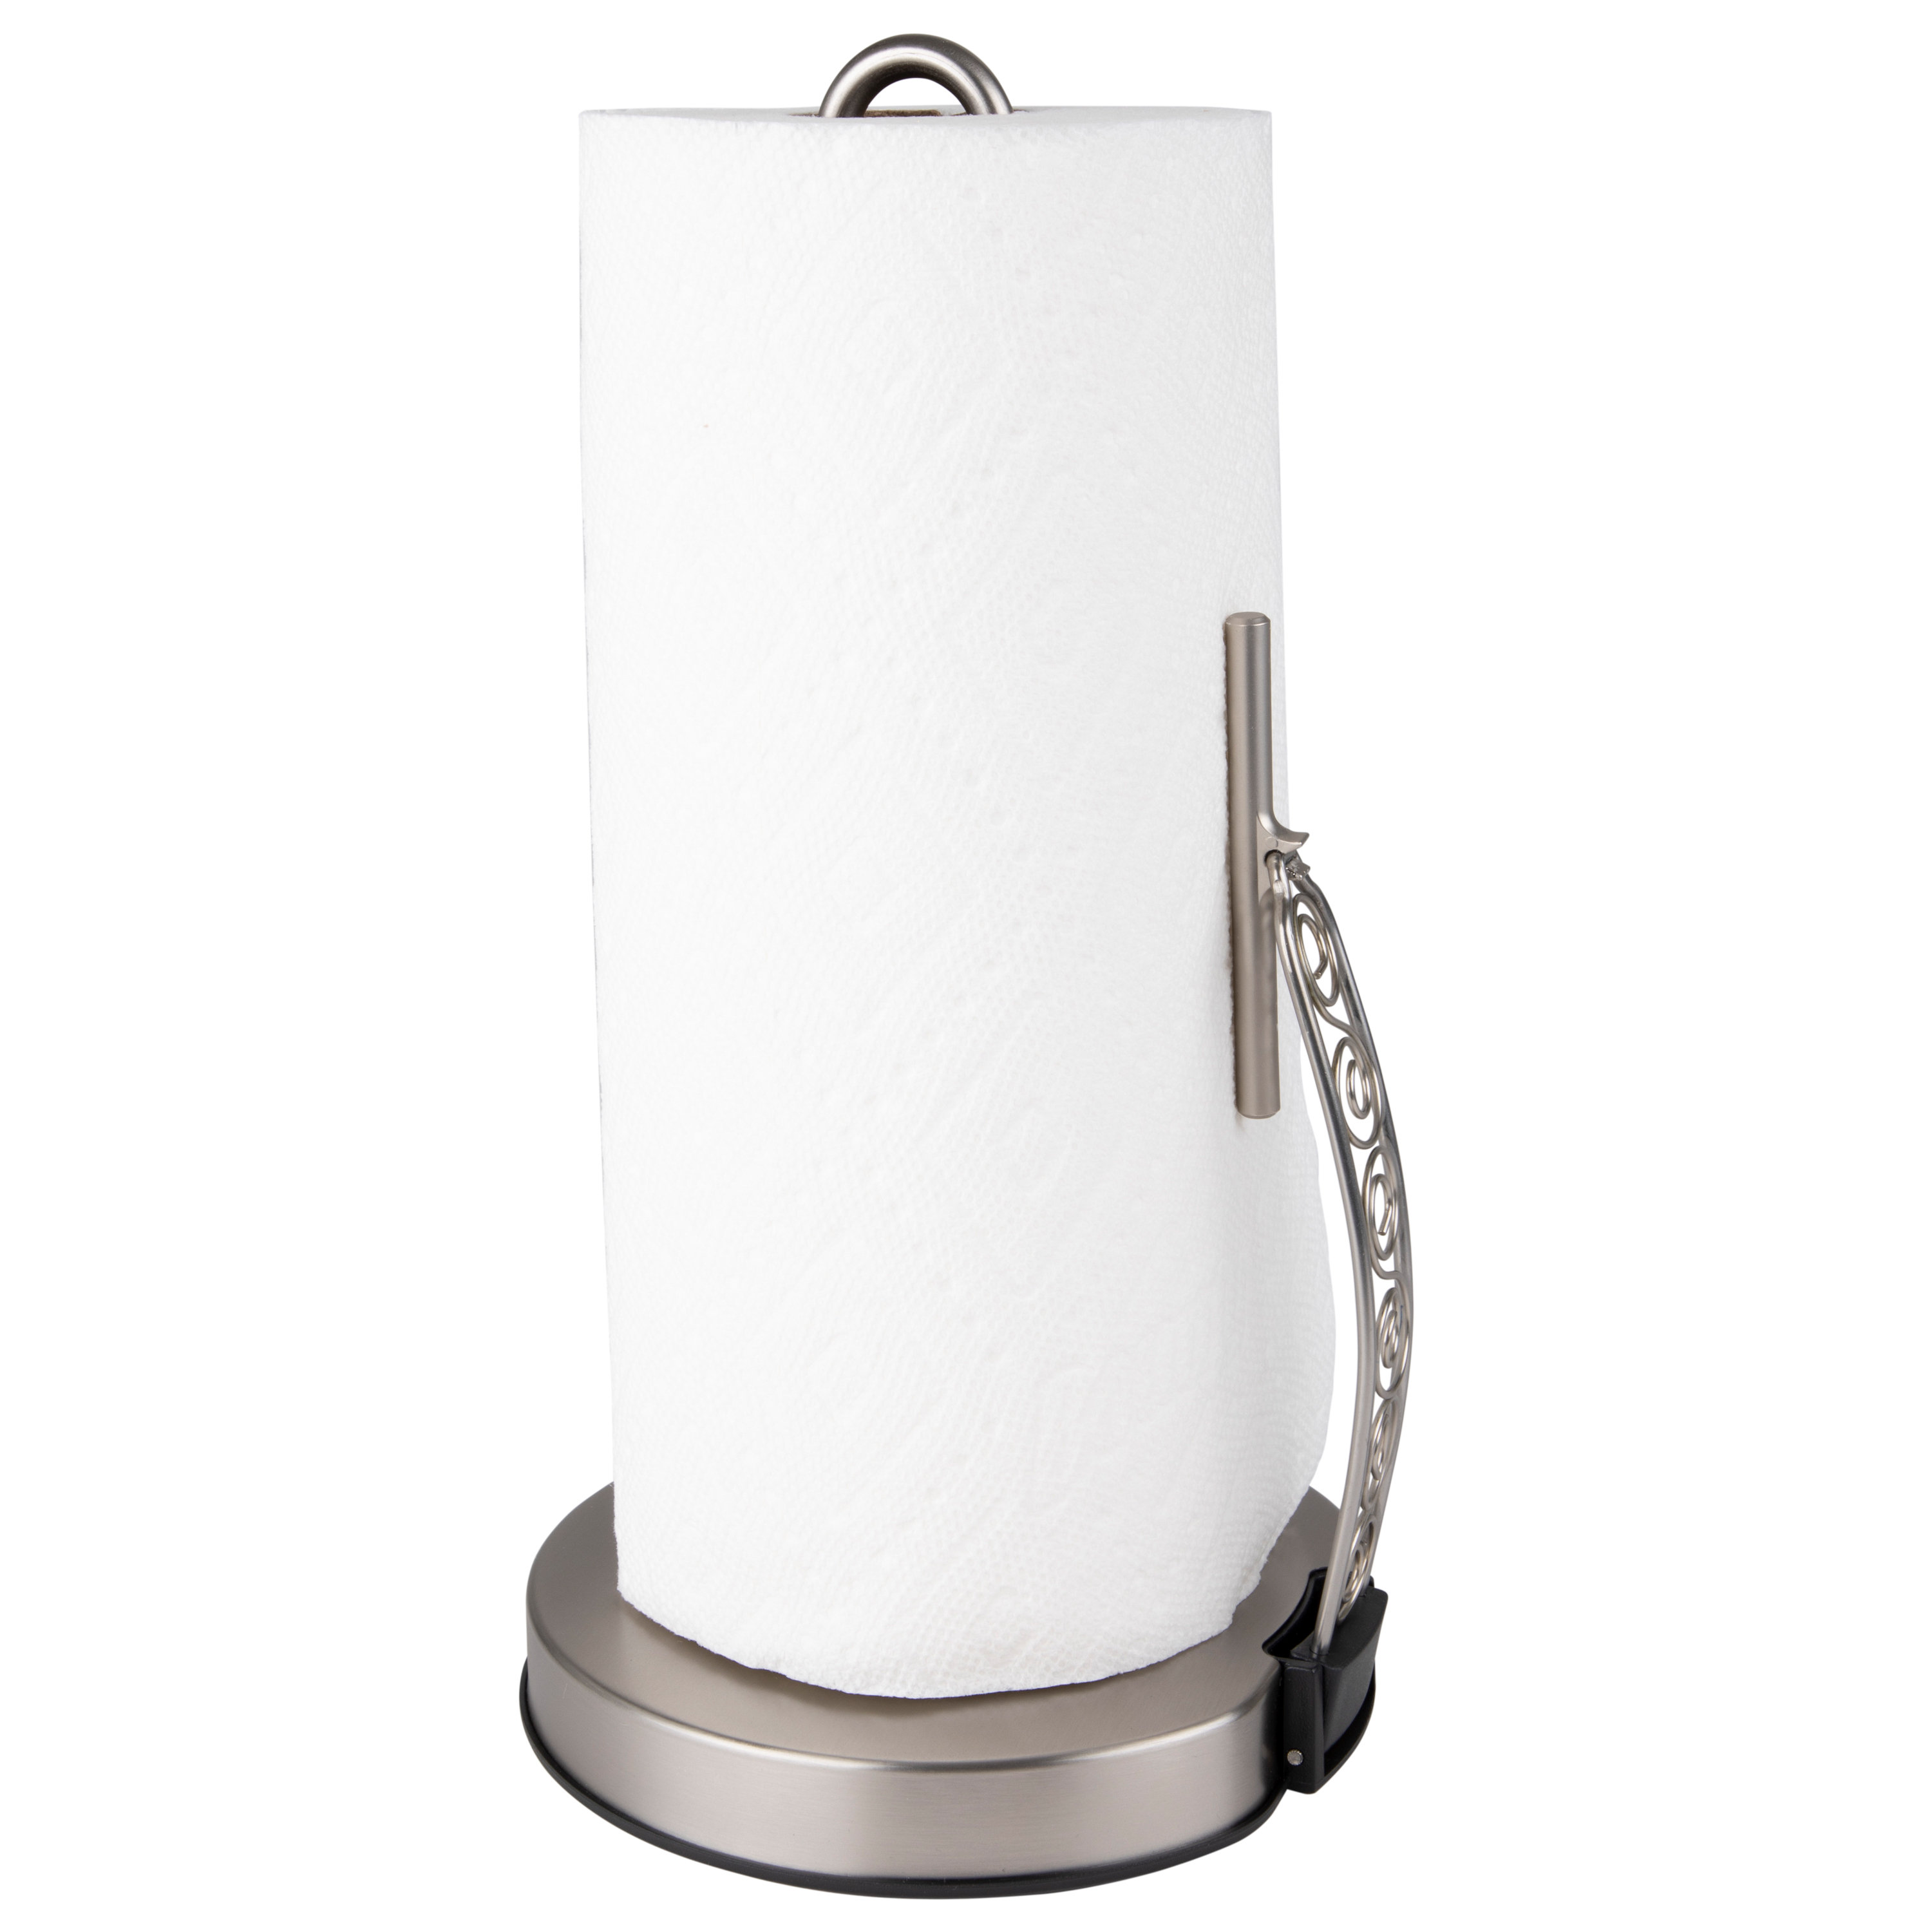 Paper Towel Holder Stainless Steel - One Hand Tear Paper Towel Dispenser  Standing Weighted Base Non Slip, Spring Arm, Stainless Steel Paper Towel  fits